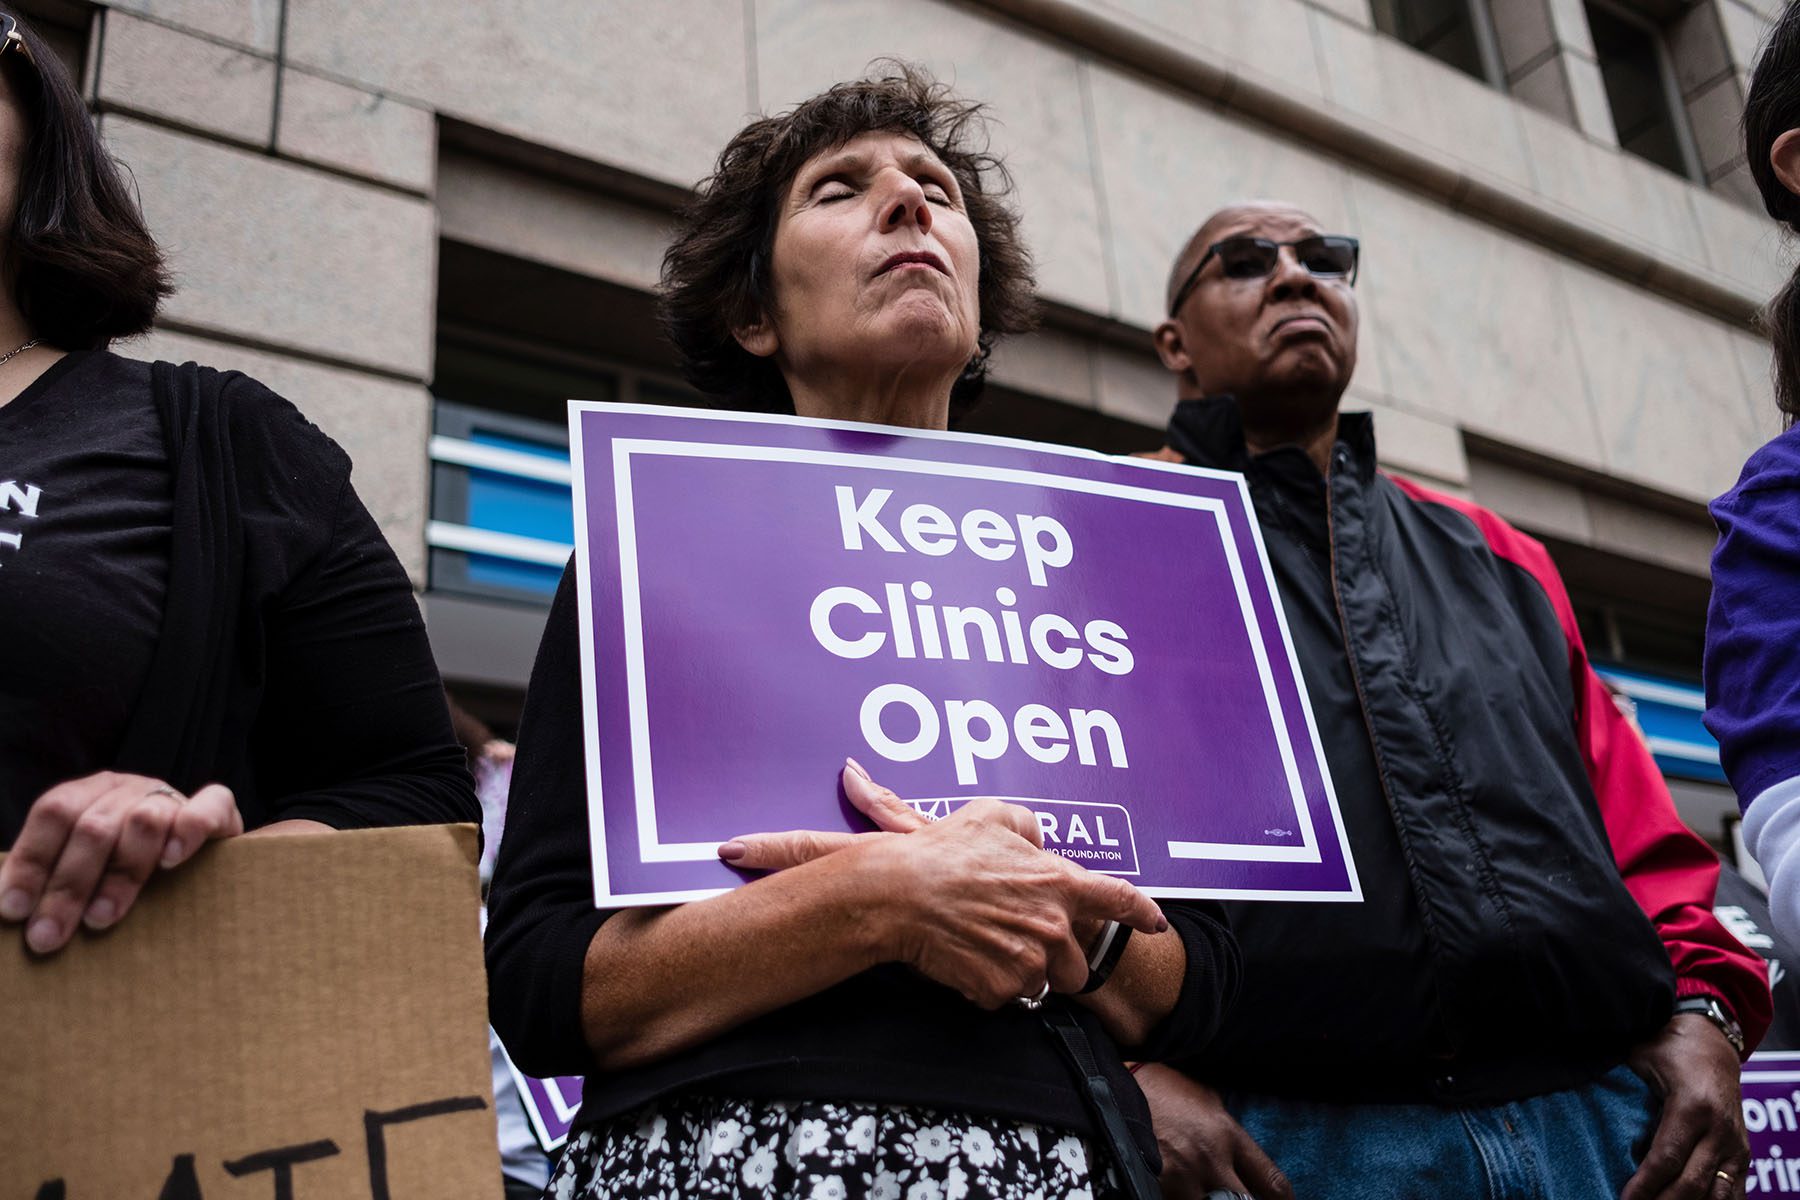 An activist seen holding a placard that says keep clinics open during a protest.